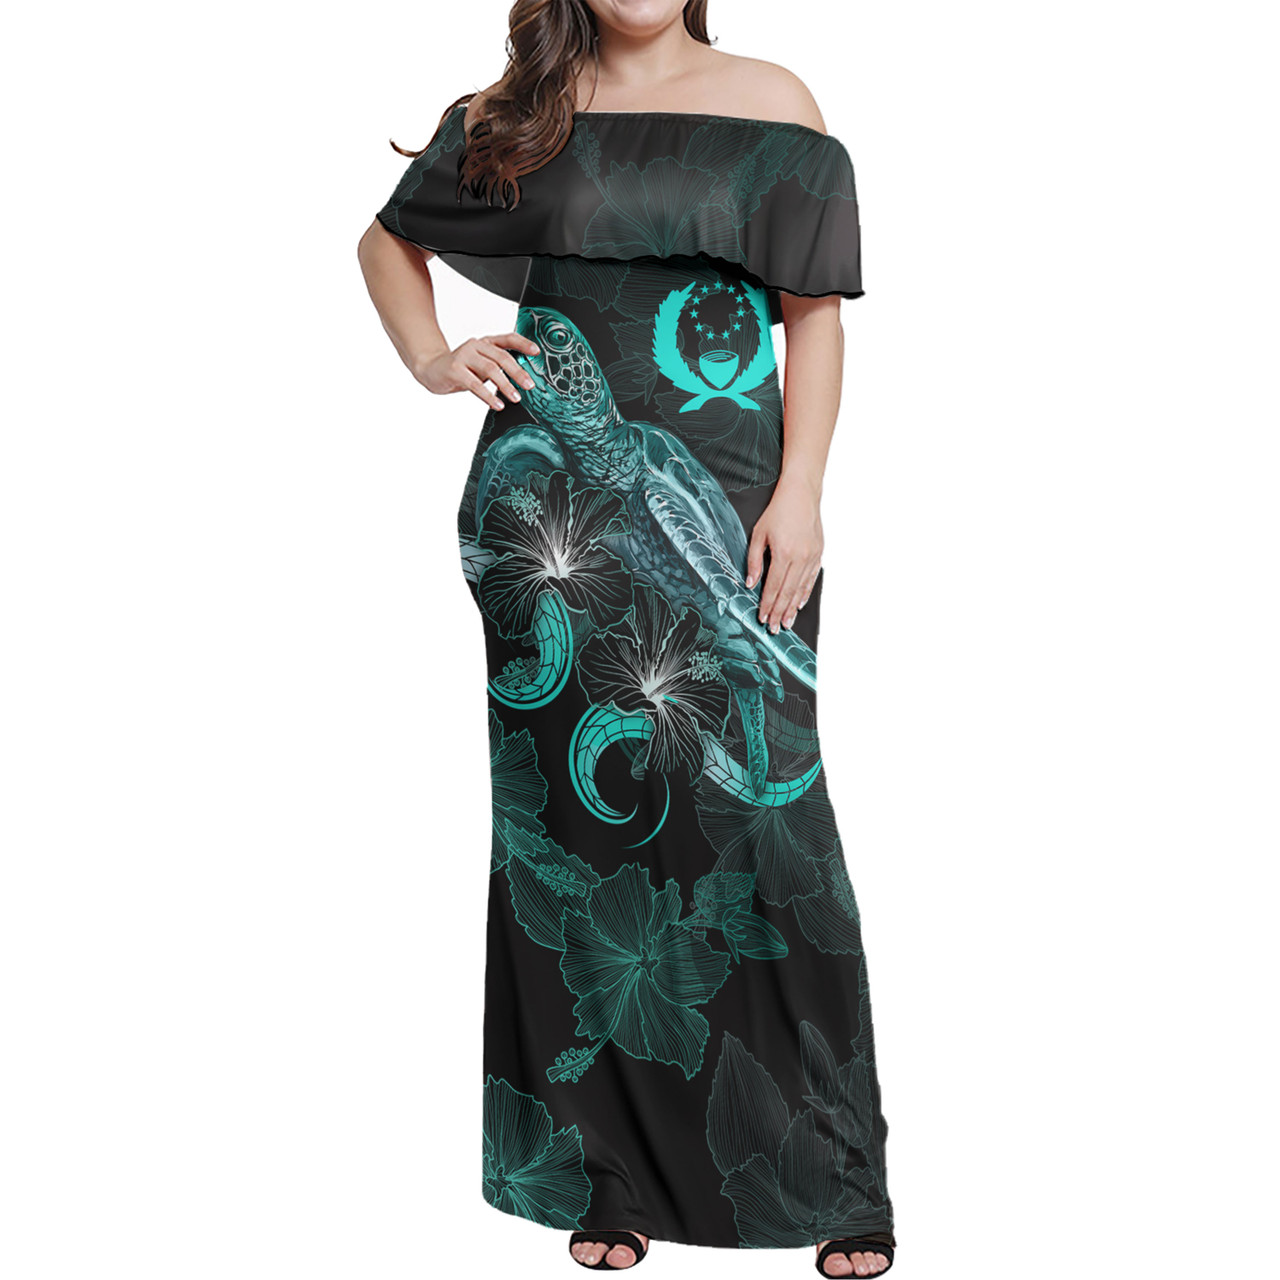 Pohnpei Off Shoulder Long Dress - Pohnpei Coat Of Arms With Turtle Blooming Hibiscus Turquoise